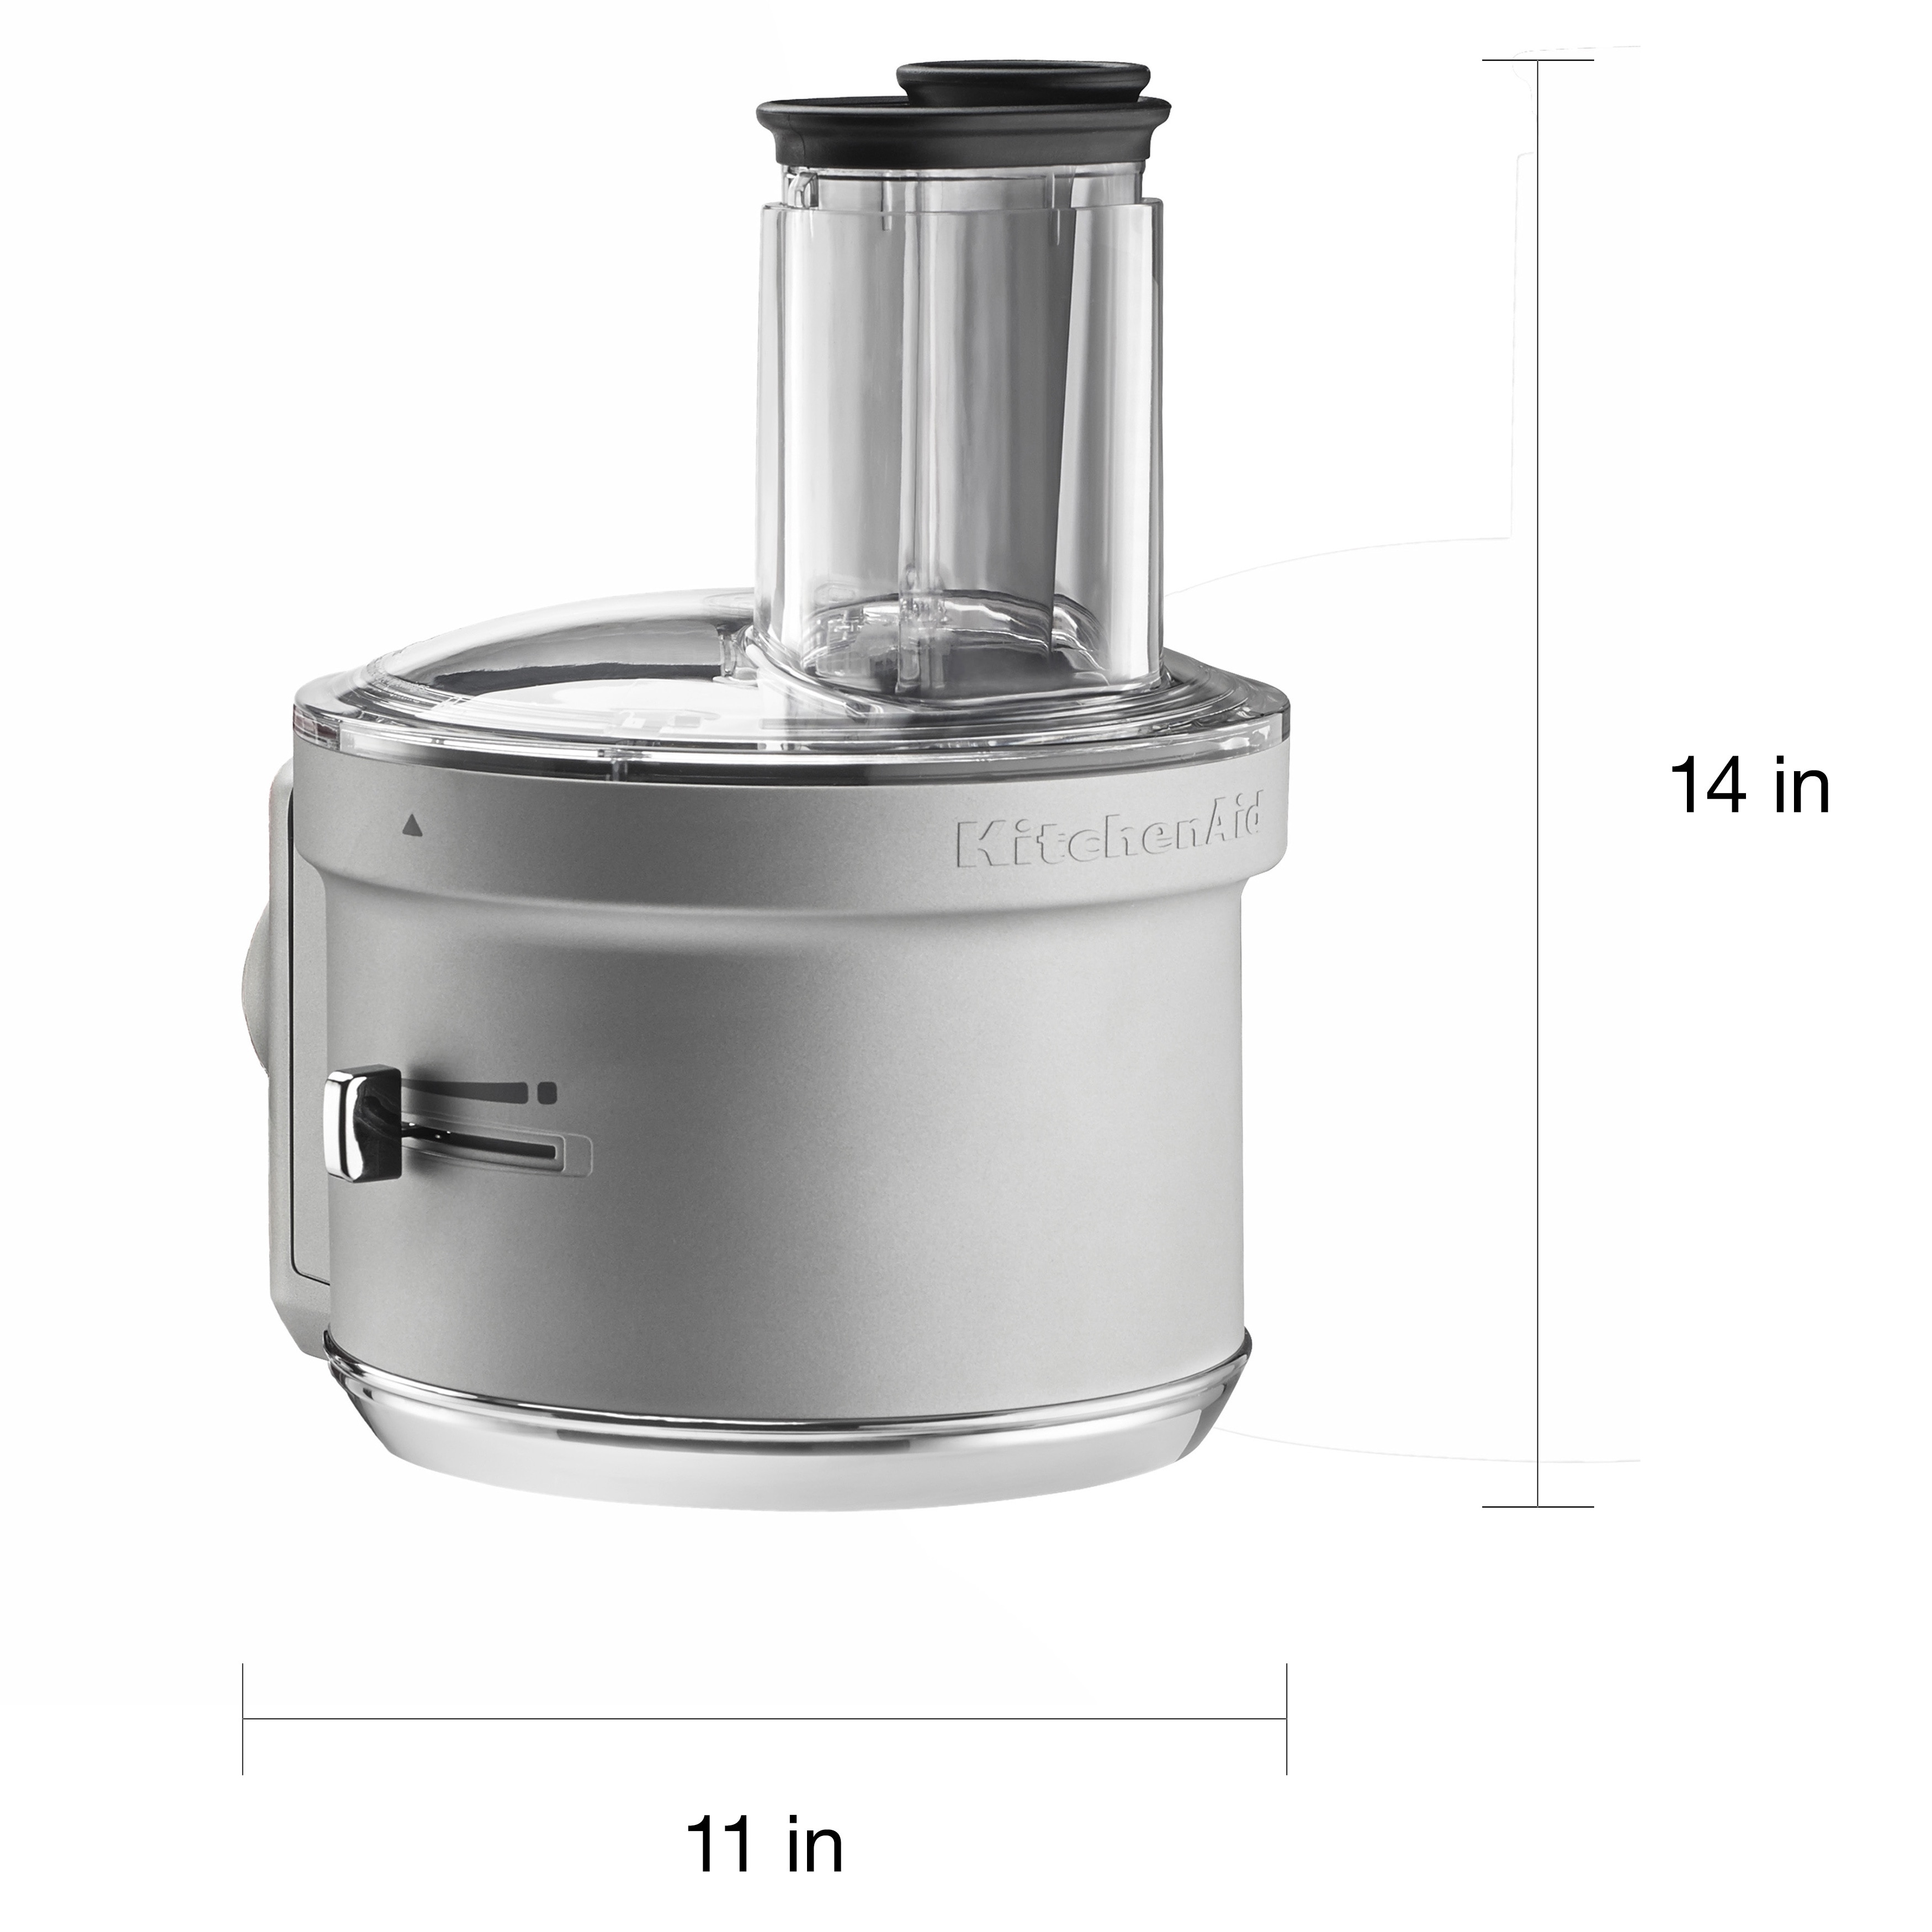 https://ak1.ostkcdn.com/images/products/9319117/KitchenAid-KSM2FPA-Food-Processor-Attachment-with-Commercial-Style-Dicing-Kit-13b80fc3-227d-4511-861b-49f0d6c779b4.jpg